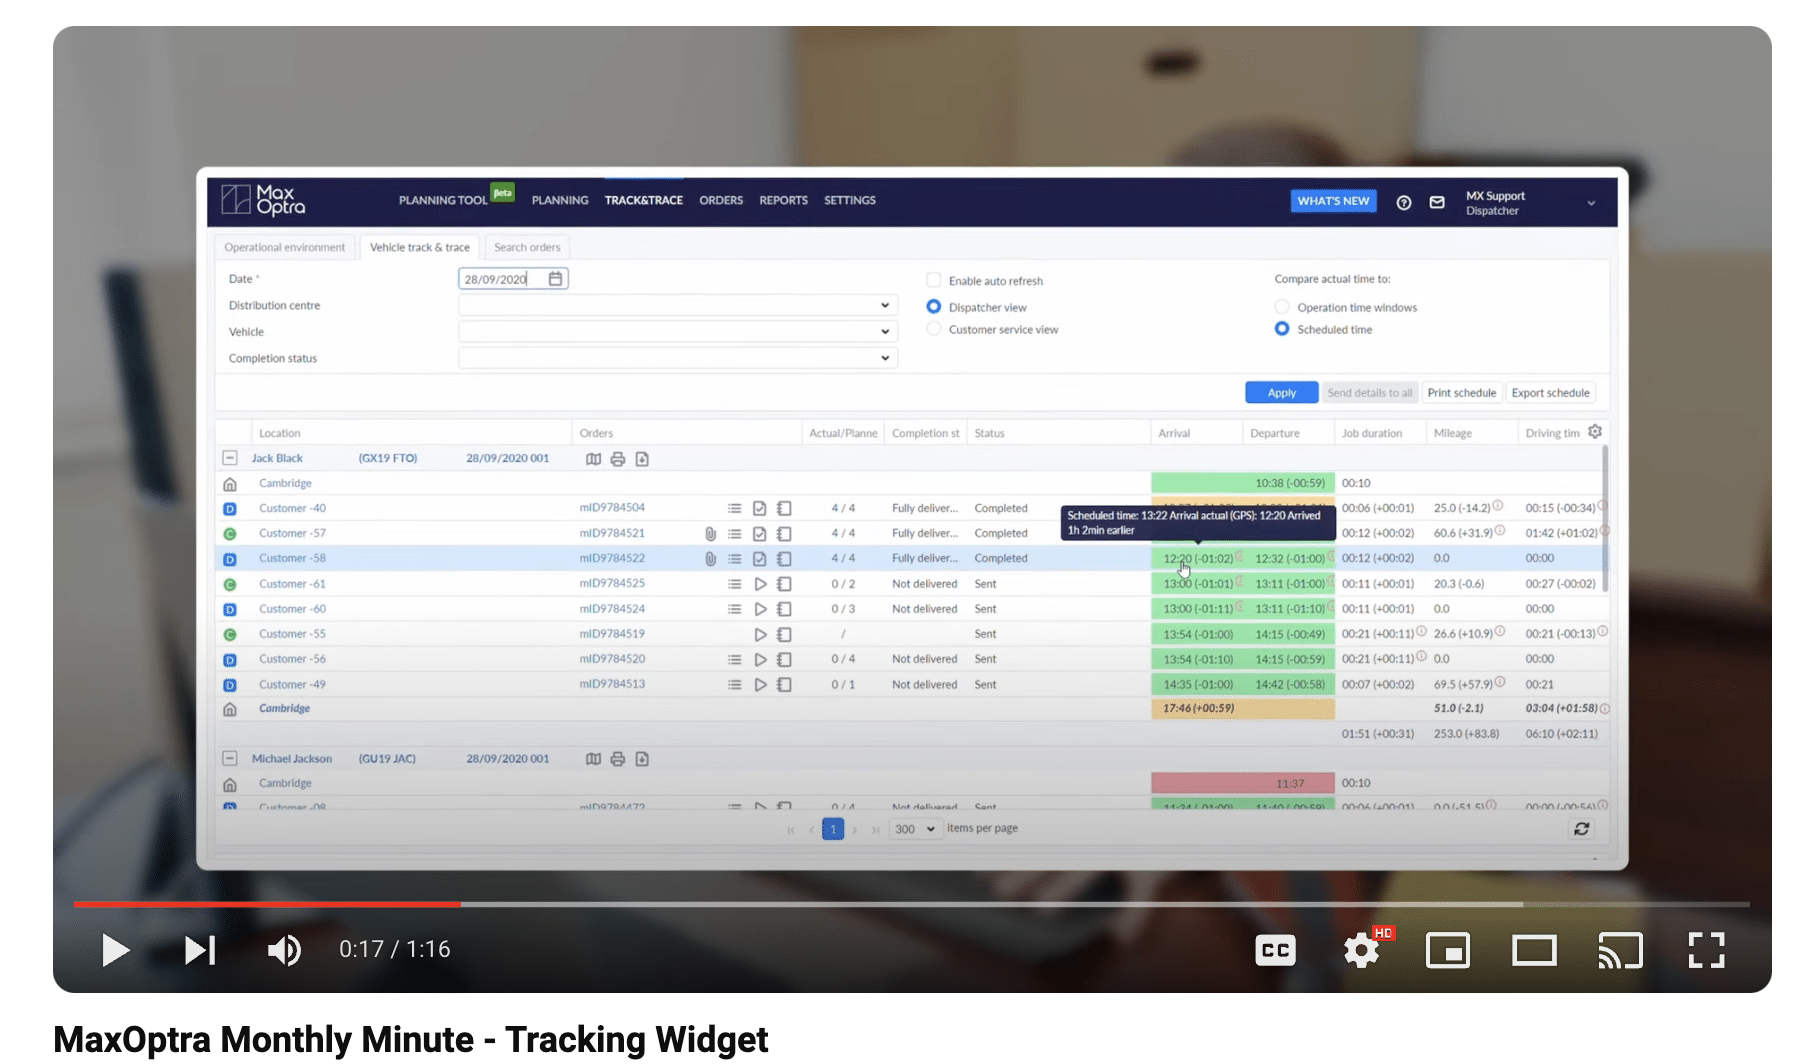 Screenshot of a YouTube video for the MaxOptra Monthly Minute, promoting the Tracking Widget